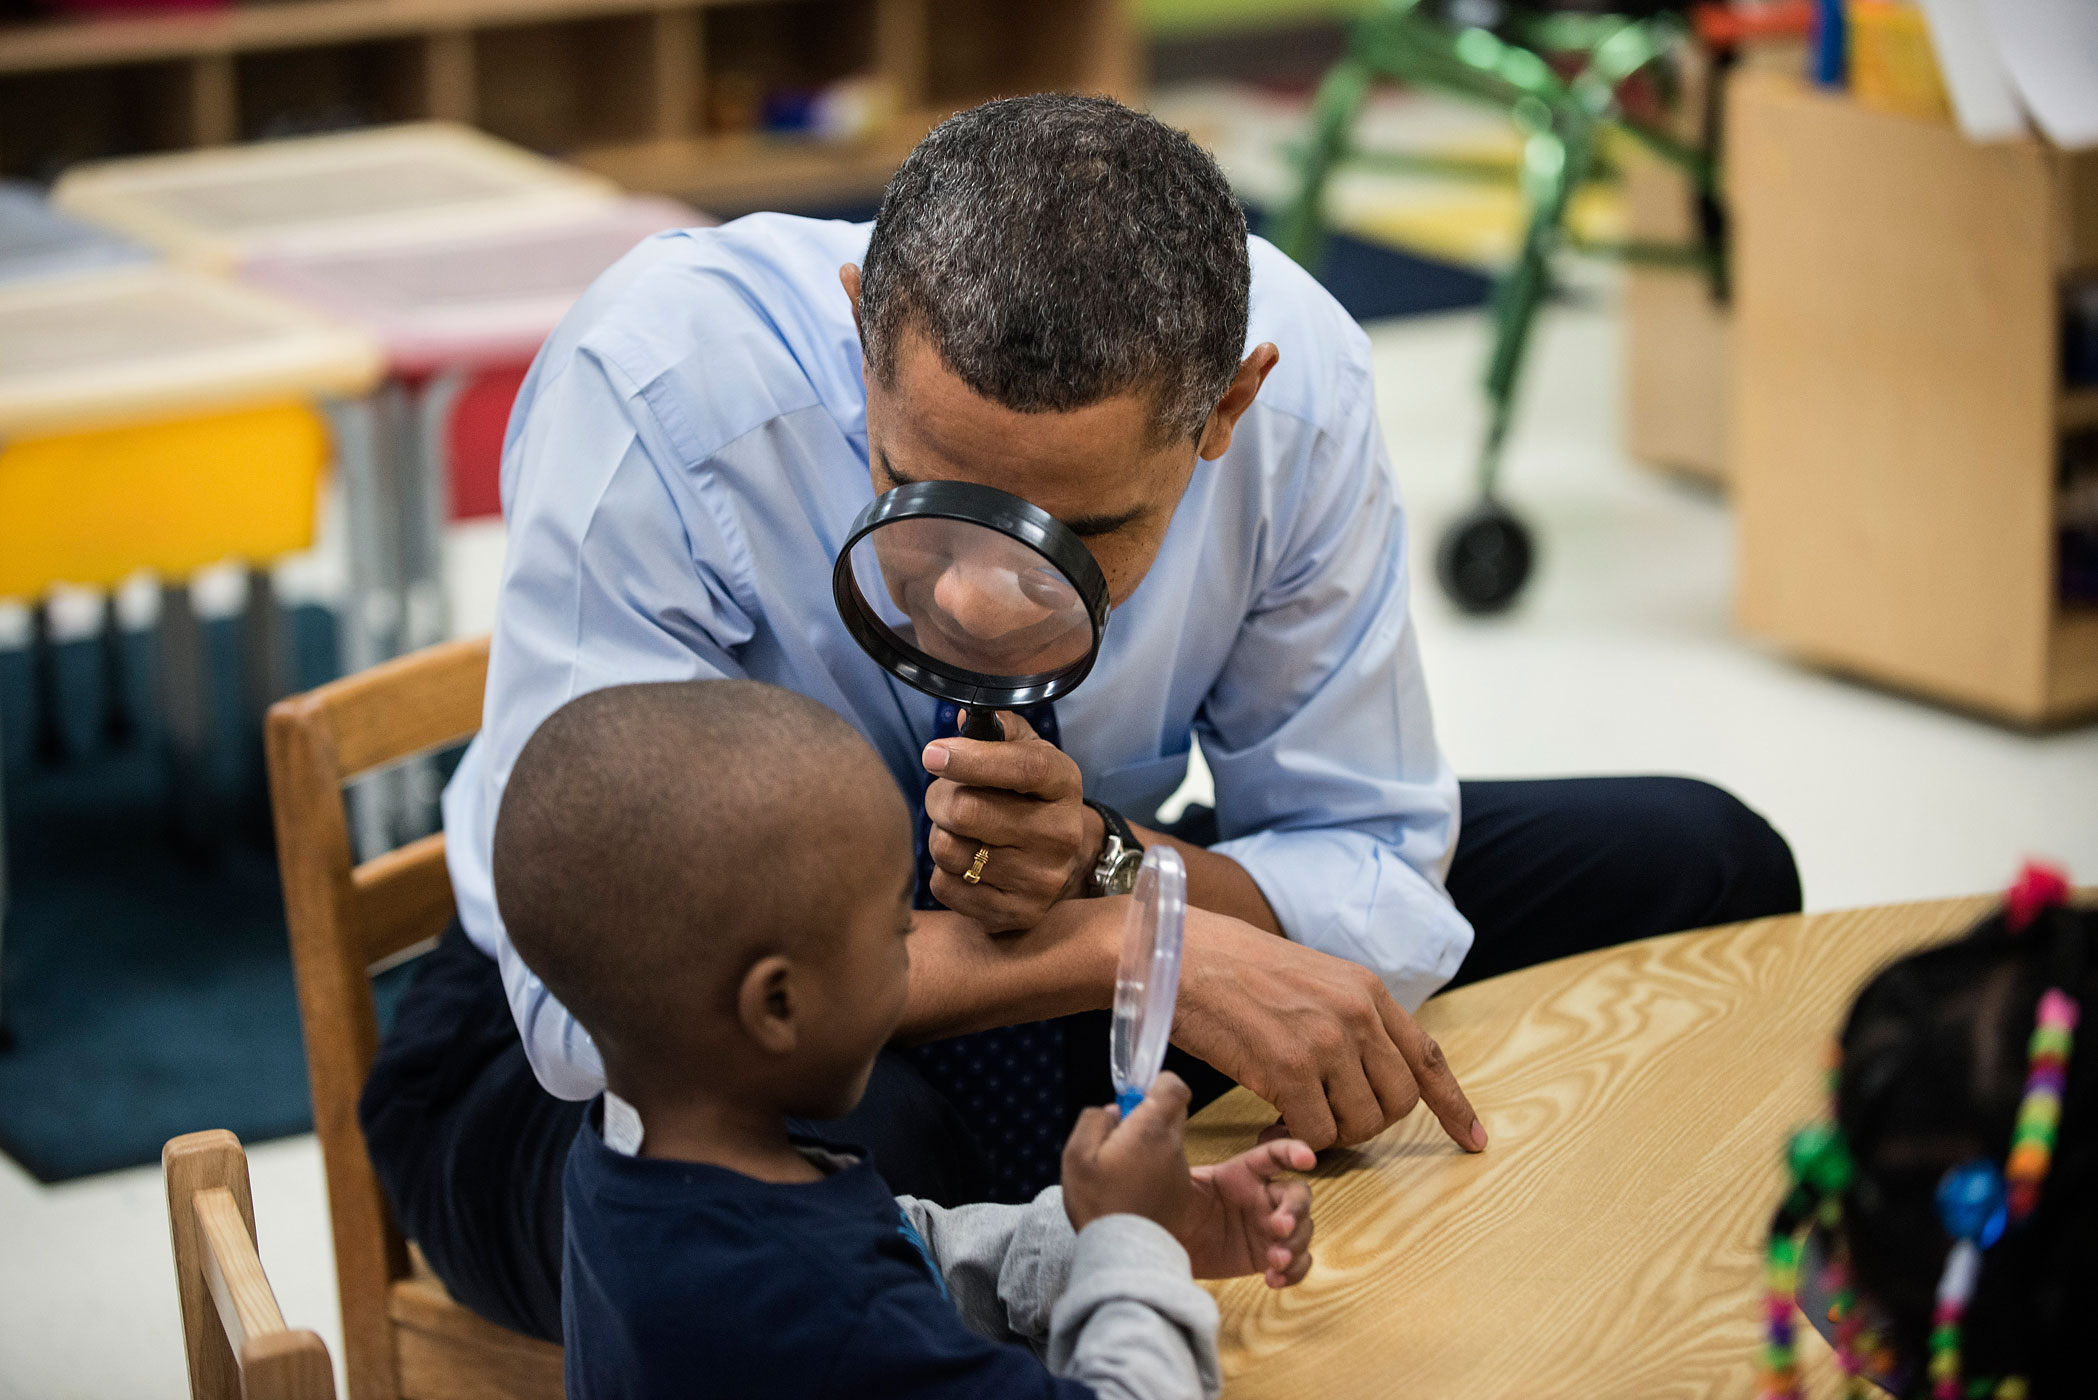 Feb. 14, 2012. President Barack Obama looks at a boy with a magnifying glass while visiting children at College Heights Early Childhood Learning Center in Decatur, Ga.